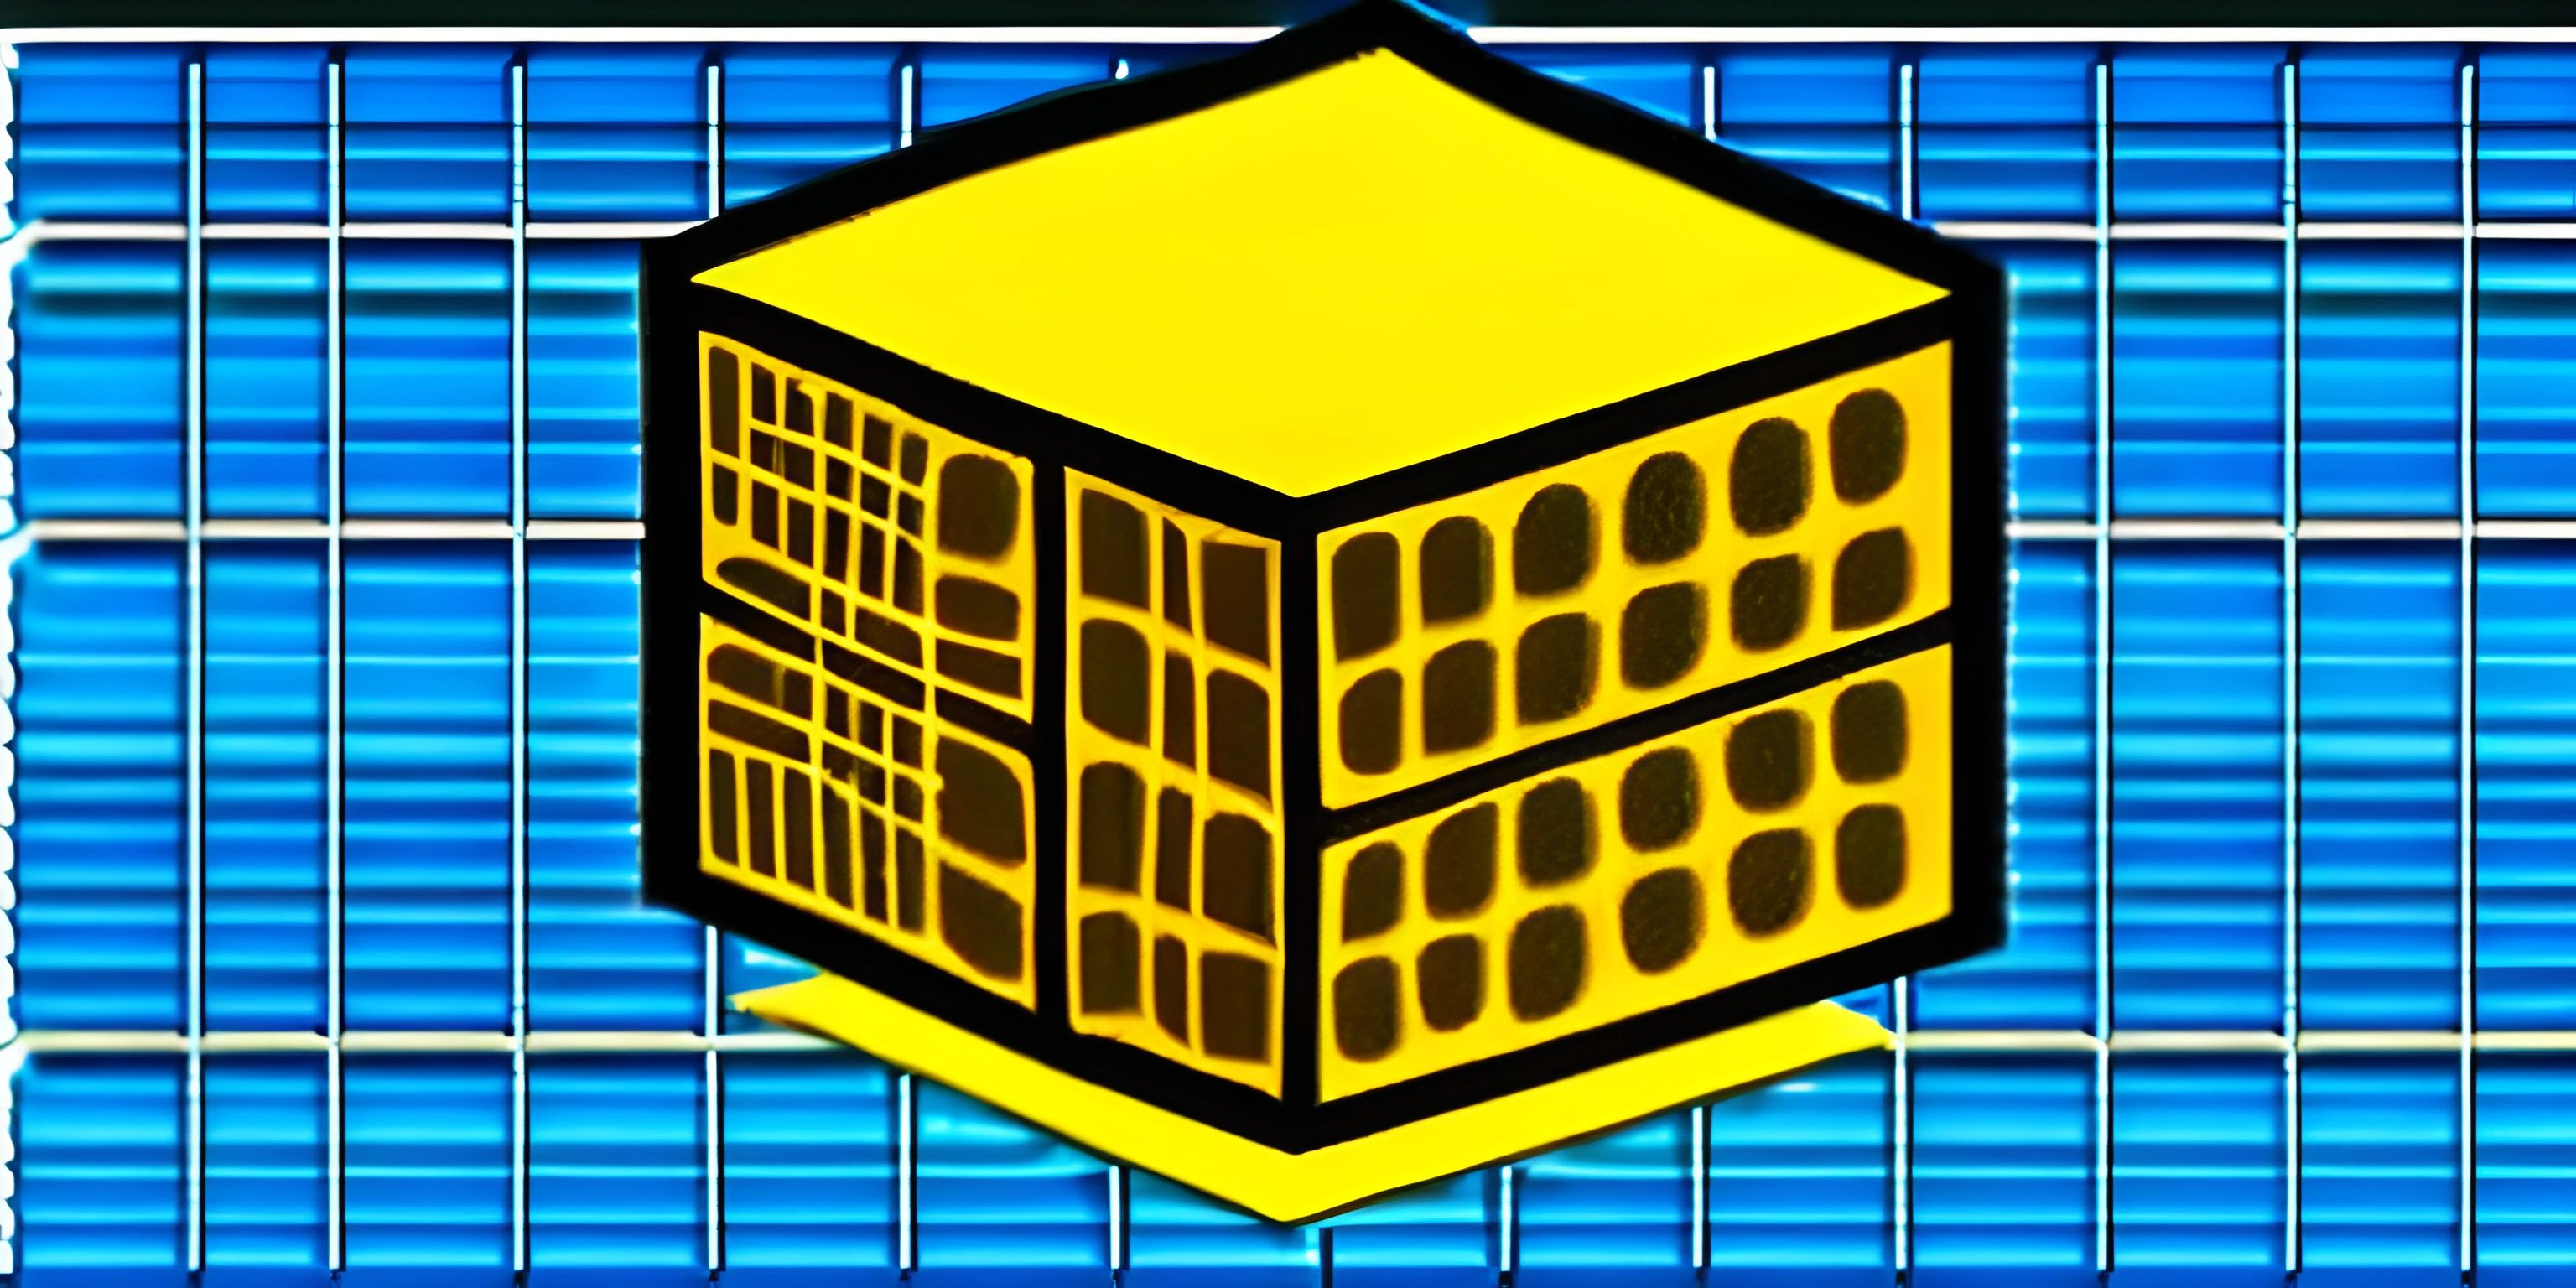 an image of a yellow cube on top of a blue tiled wall with metal grids